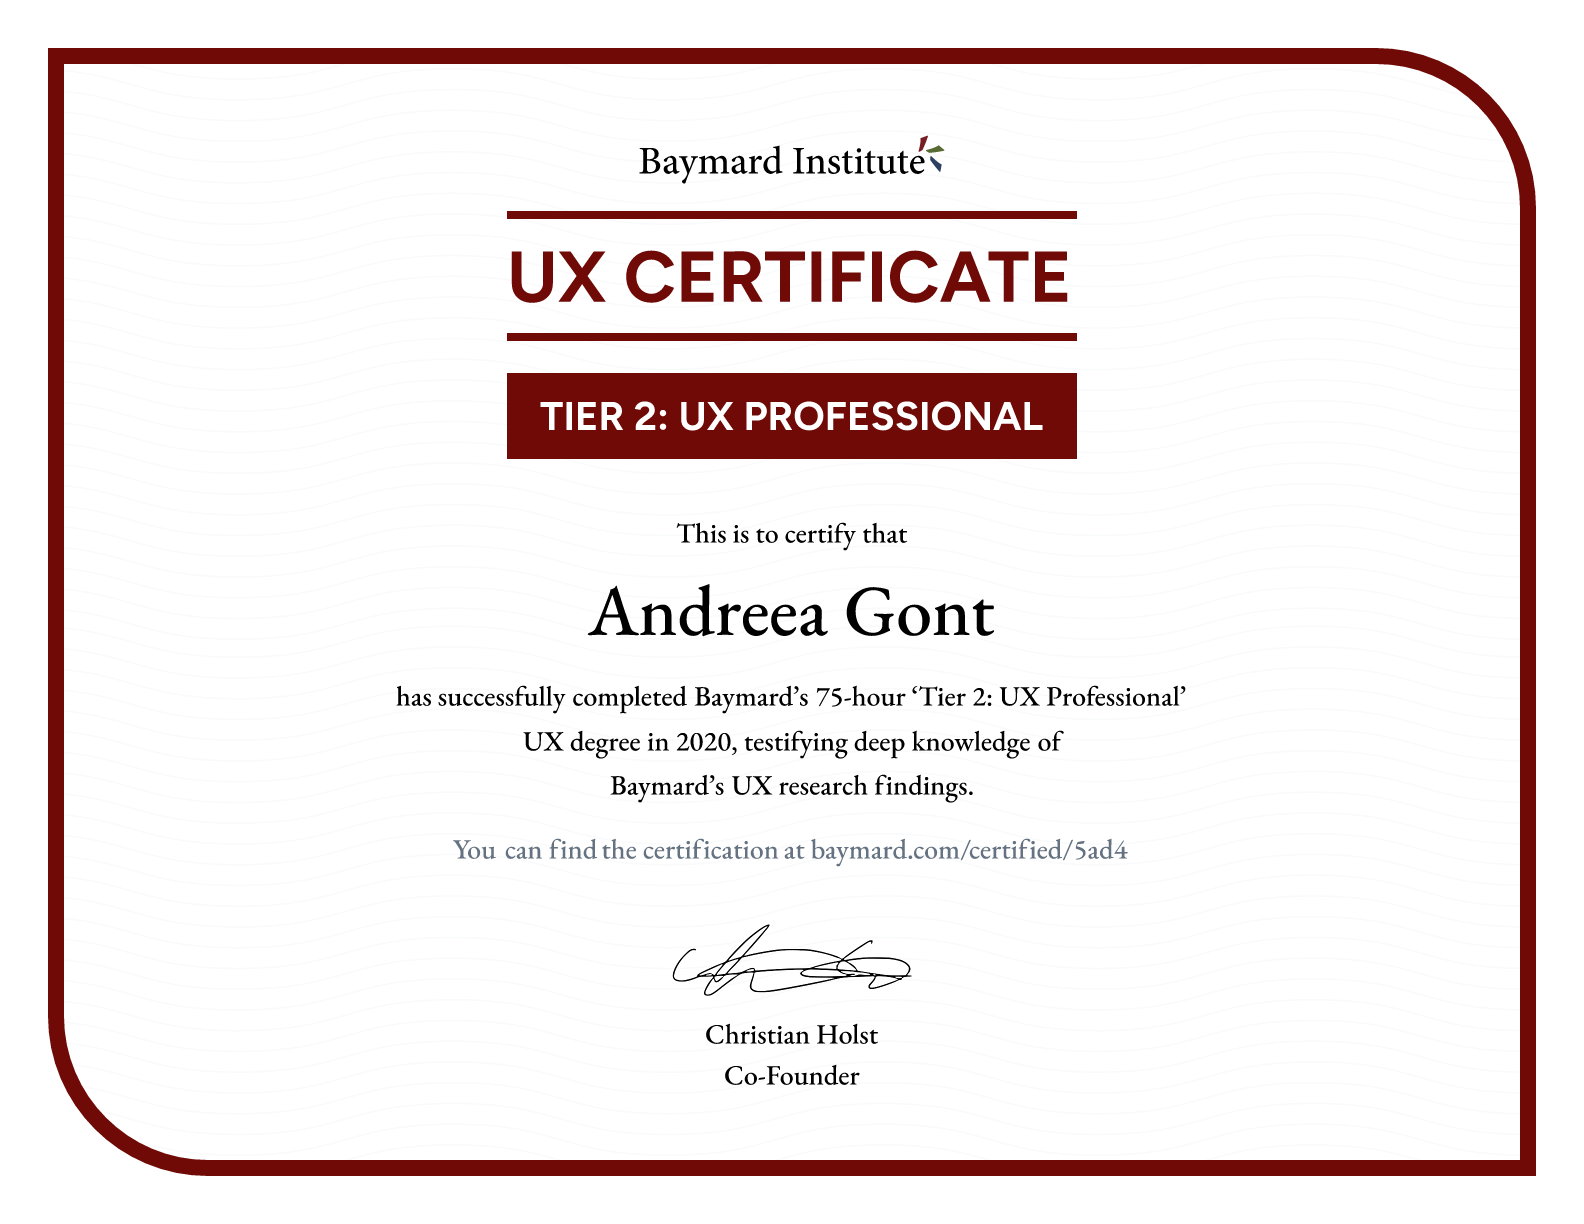 Andreea Gont’s certificate